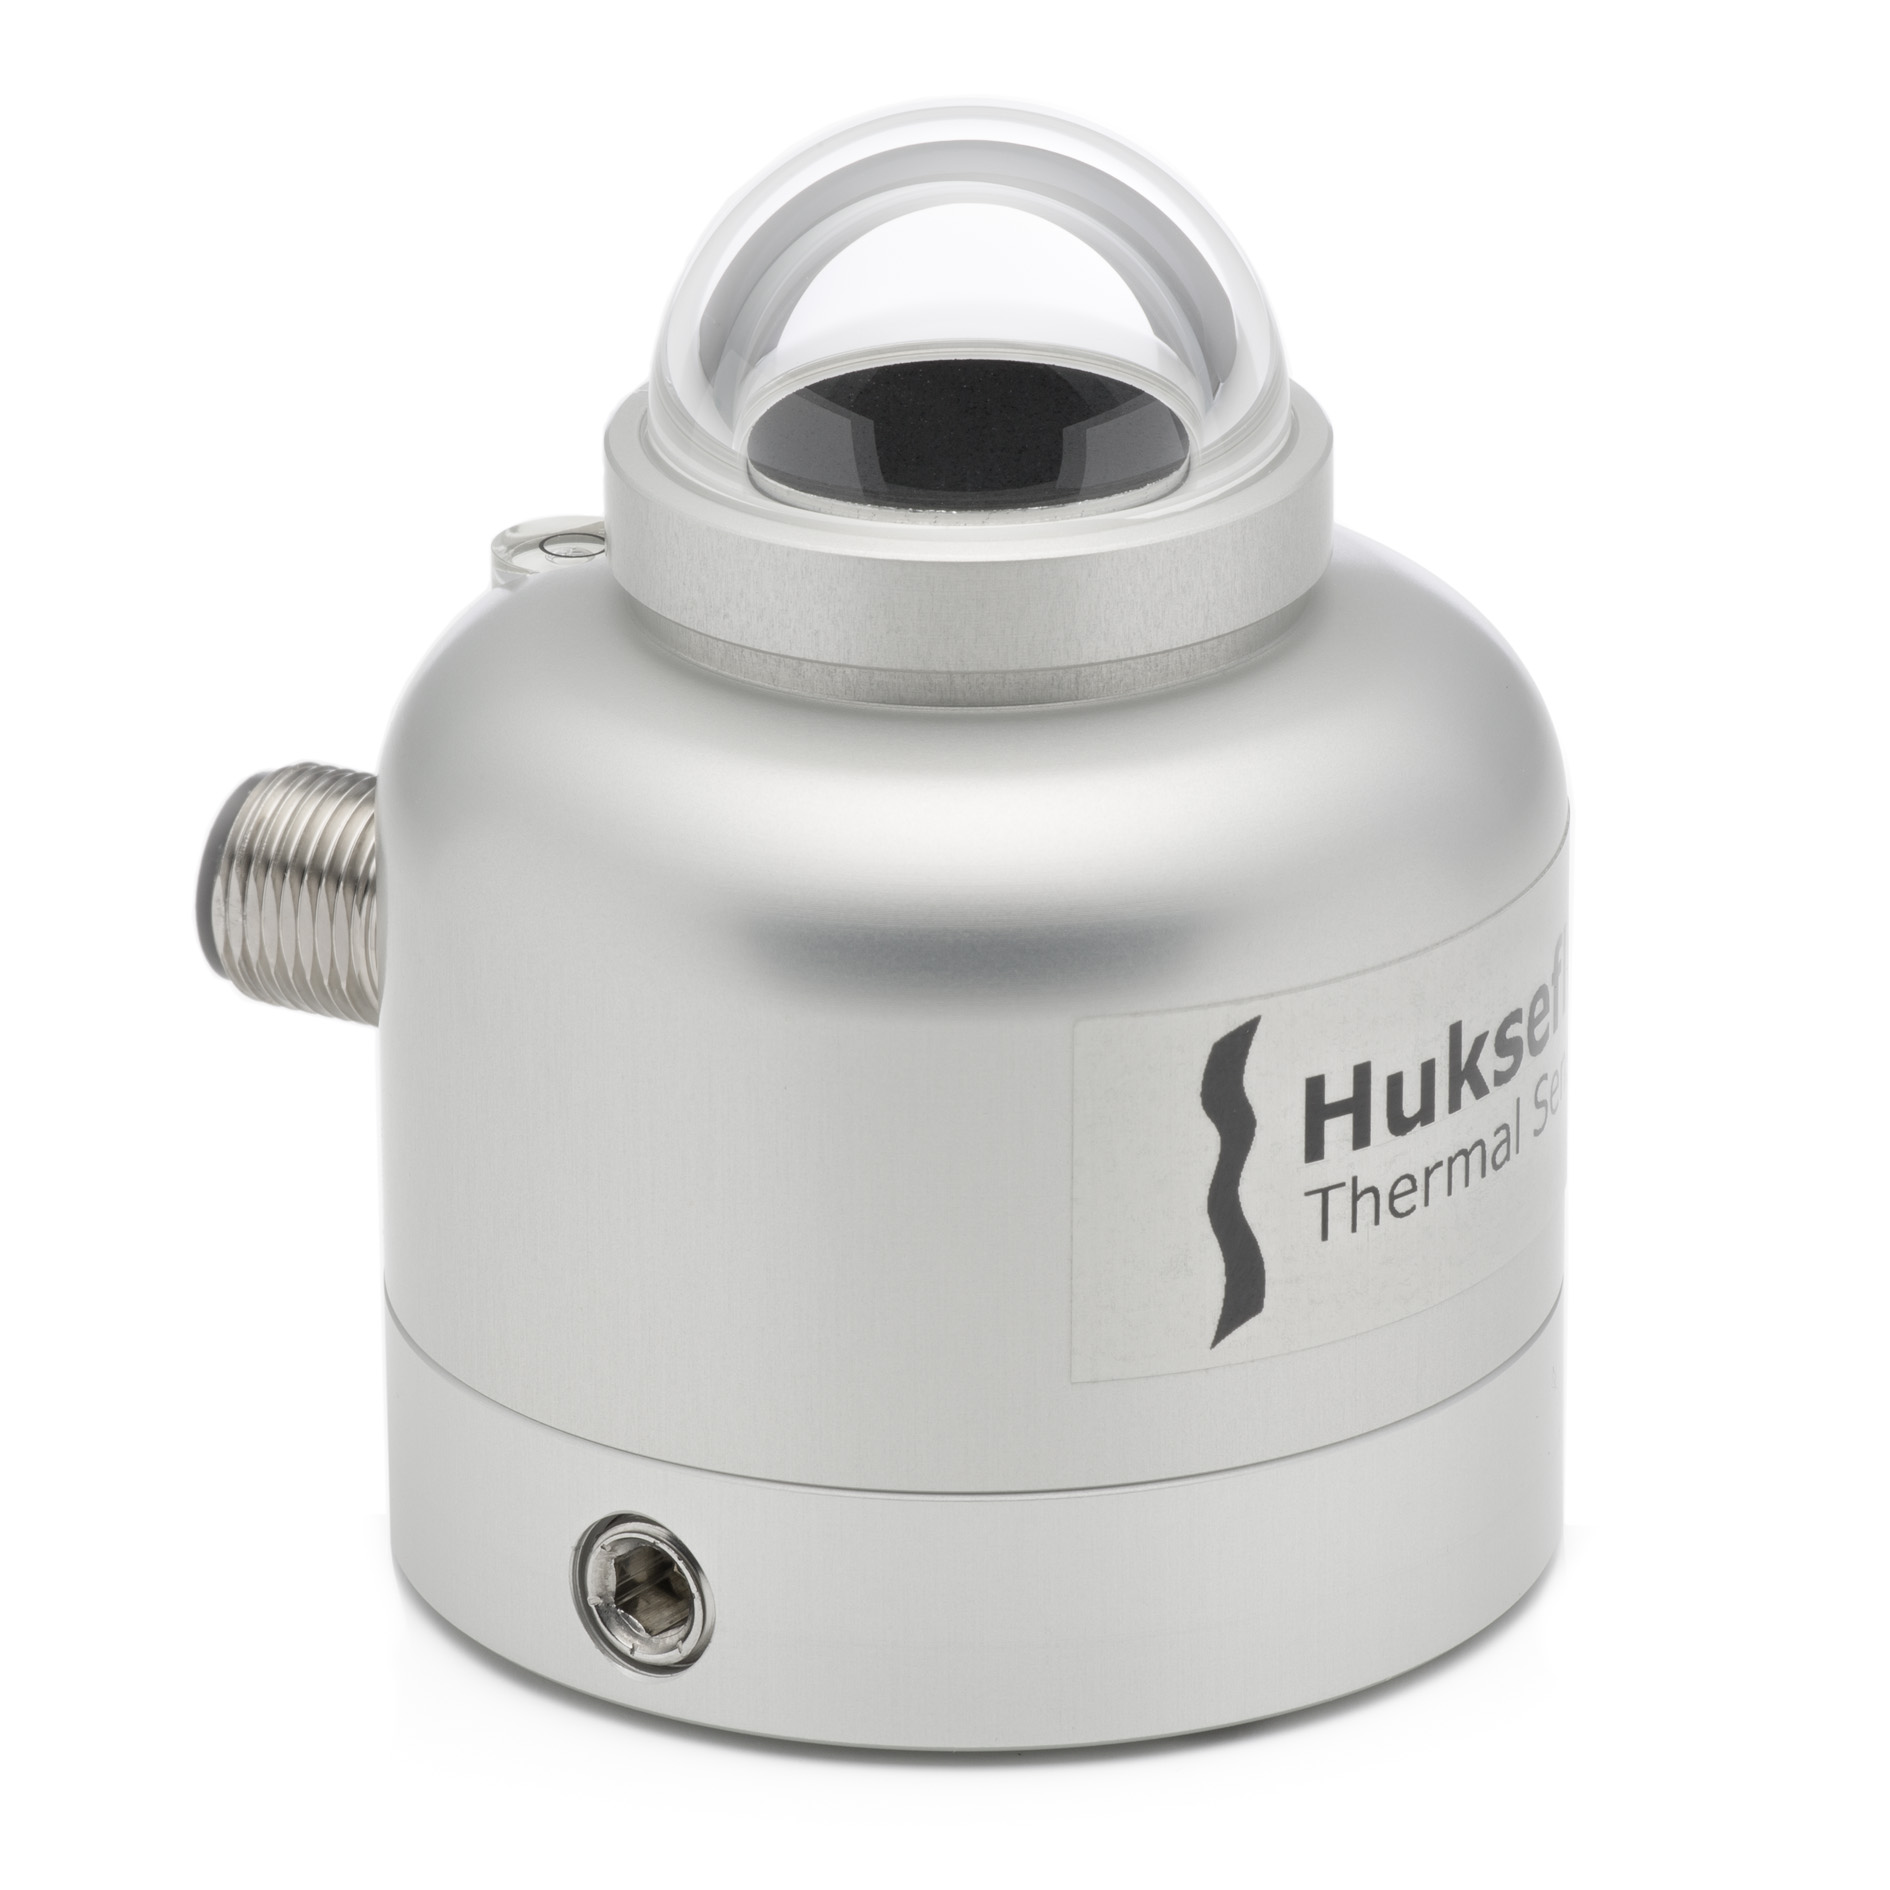 SR05 is a second class pyranometer. It has a single glass dome to insulate the sensor surface from infrared thermal exchange with the colder sky. In addition, the dome protects the sensor against the elements.